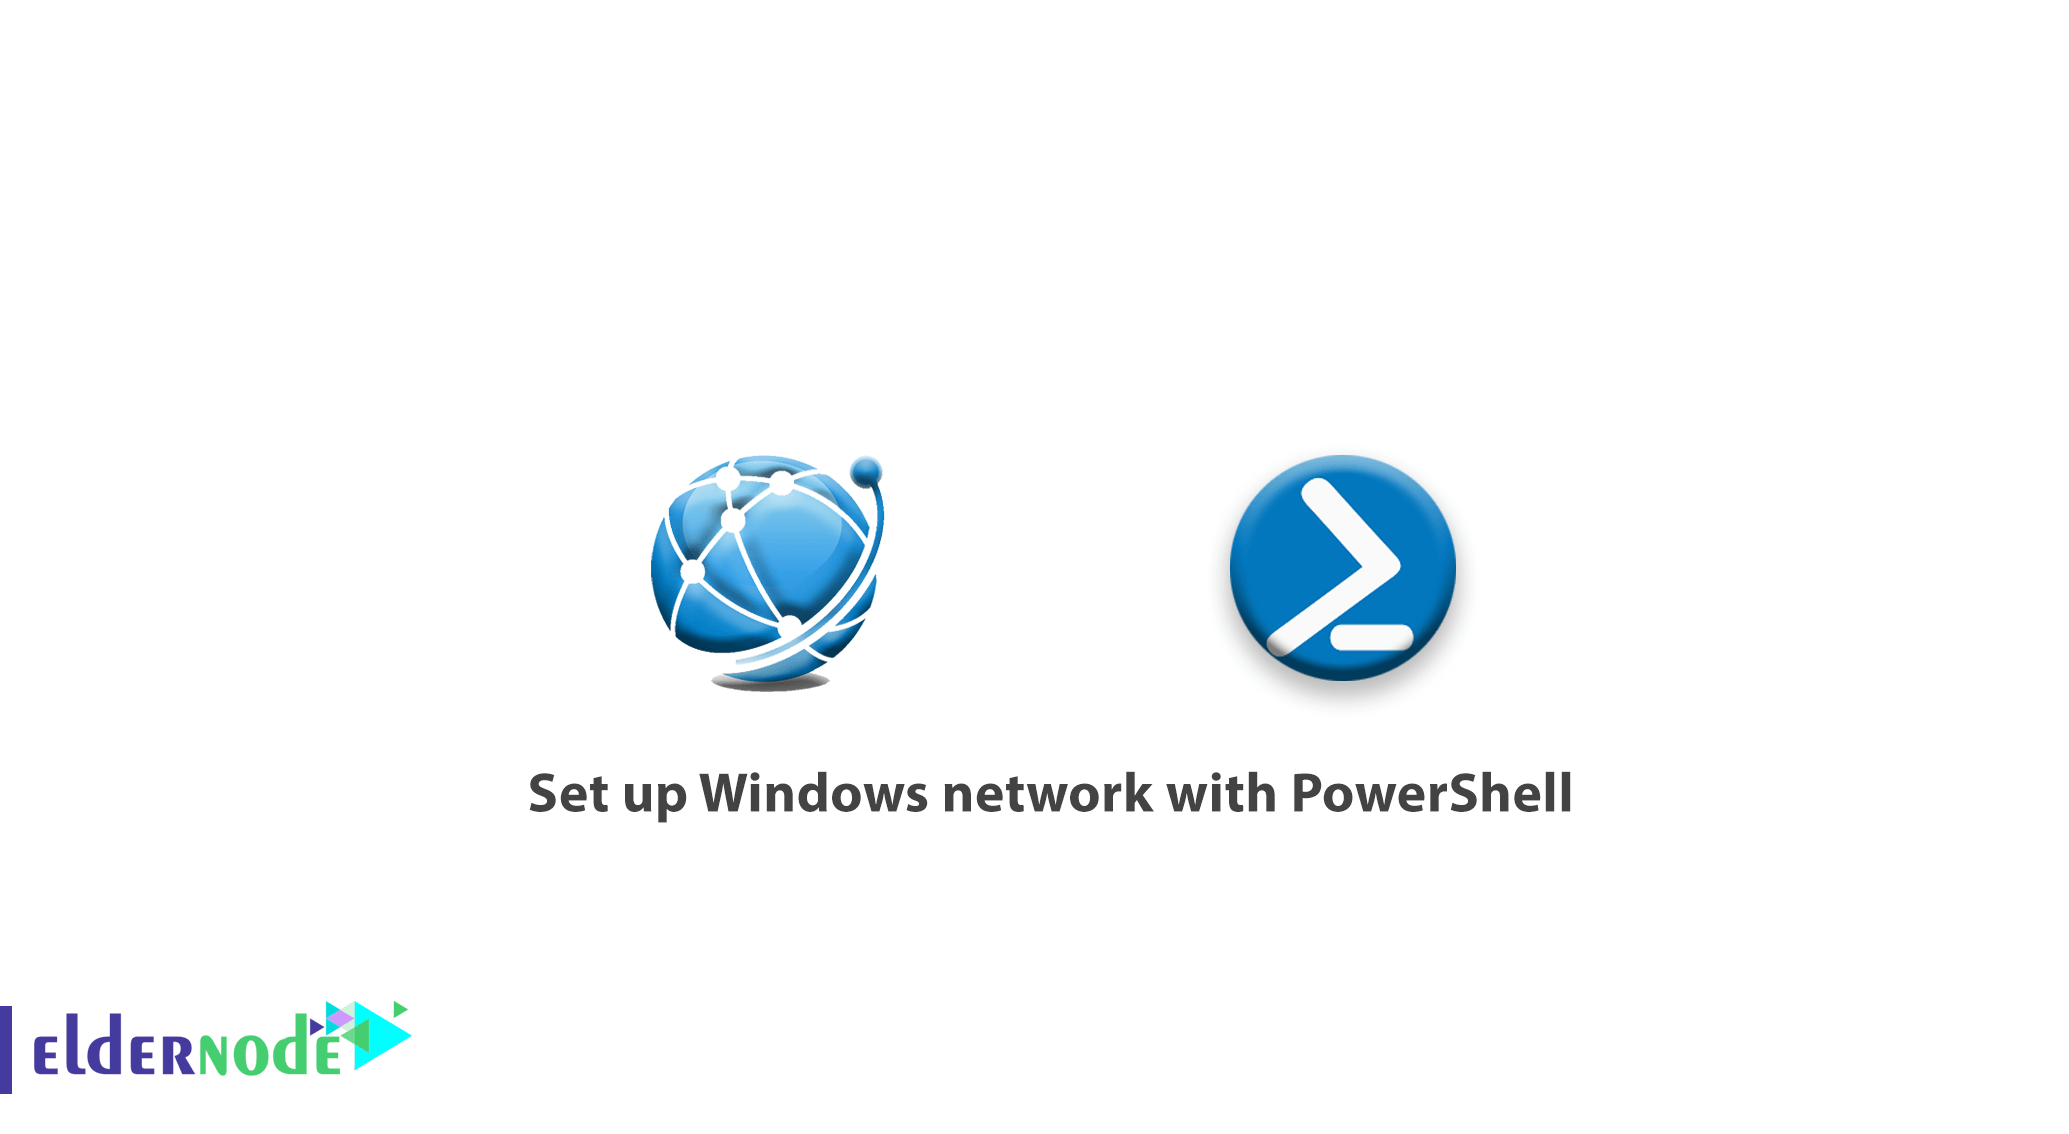 How to set up Windows network with PowerShell